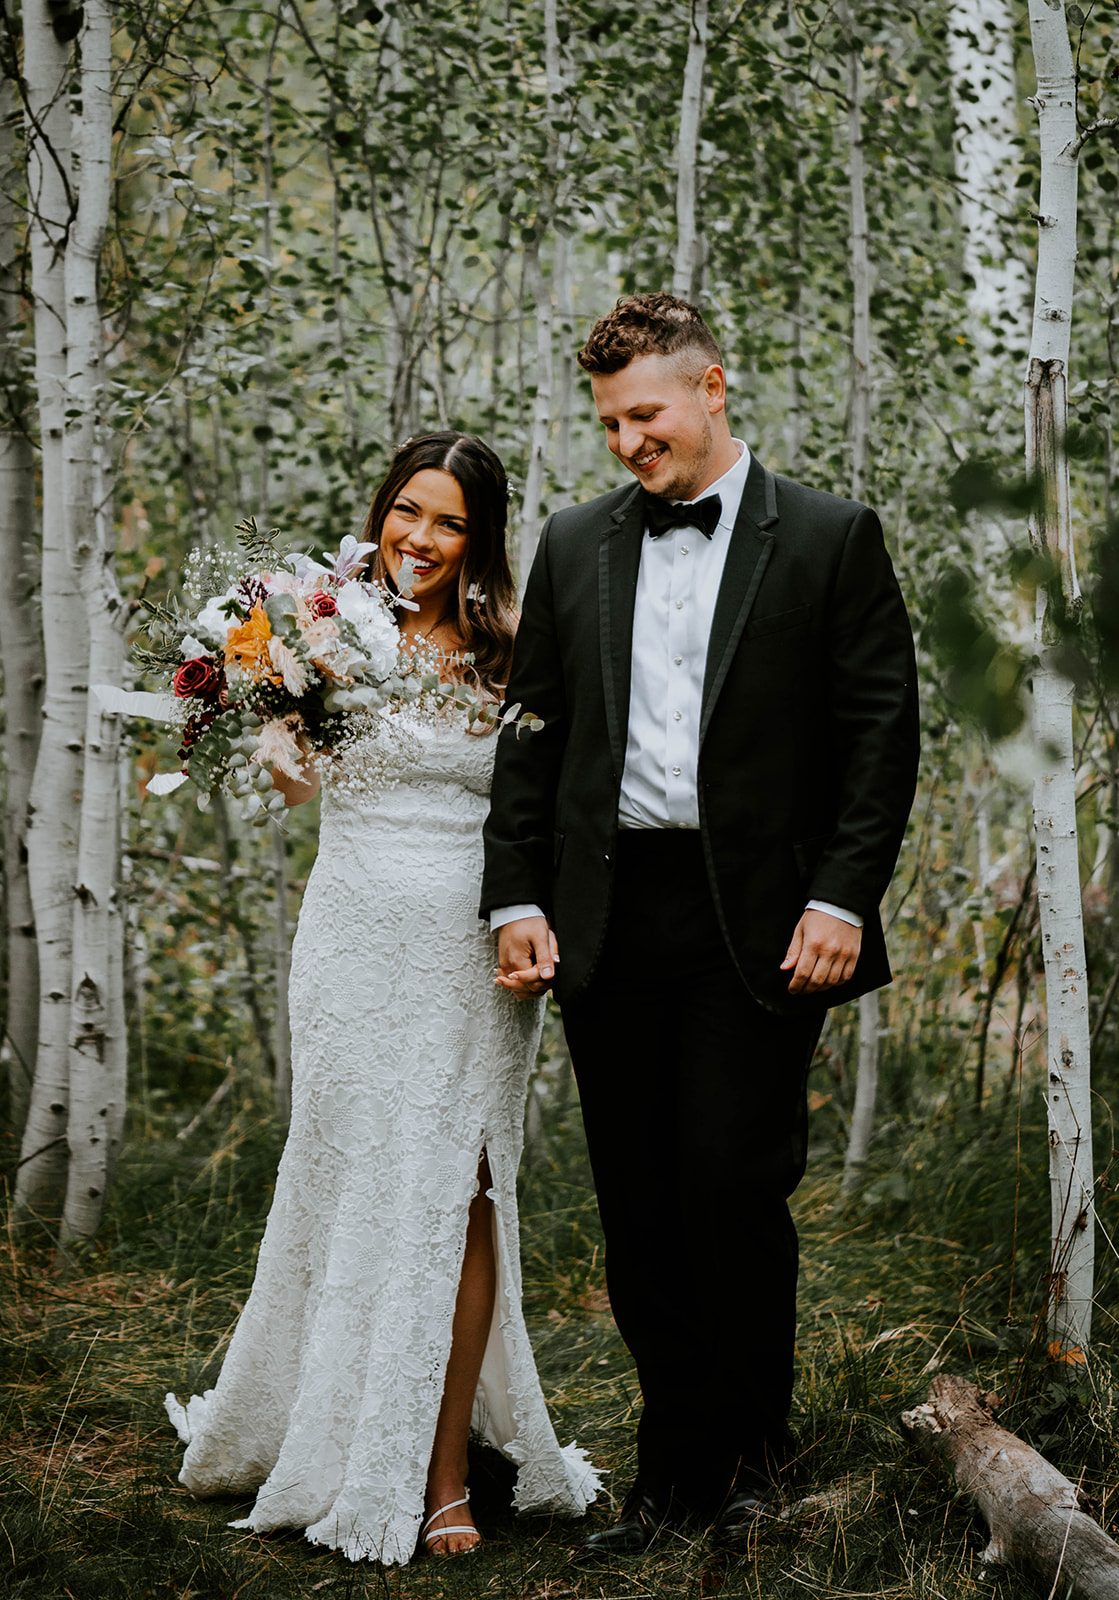 Bride and groom walking through aspen trees while bride points her bouquet at the camera